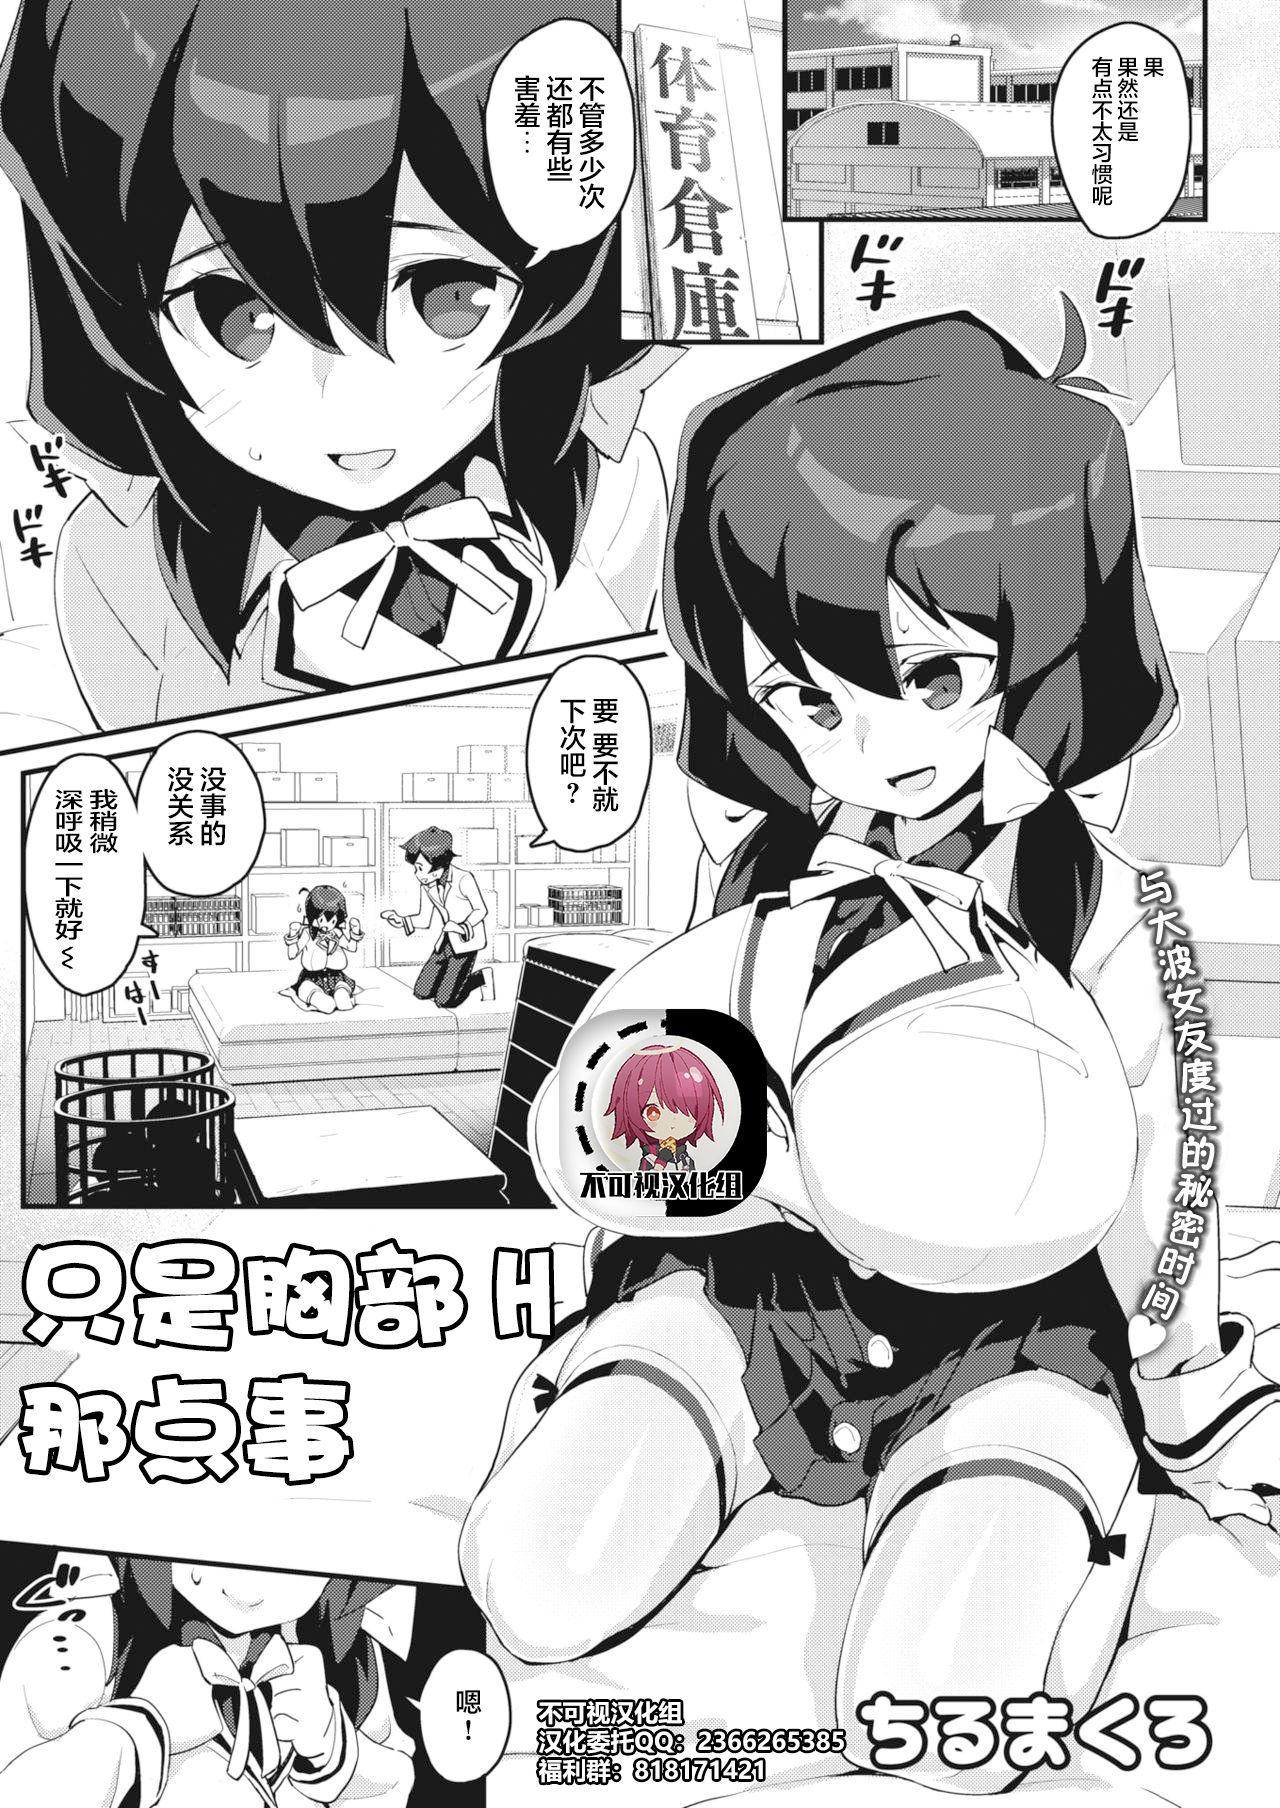 Amatures Gone Wild [Chirumakuro] Oppai H dake no Kankei | A Relationship with Lewd Boobs Only! (COMIC HOTMILK 2021-04) [Chinese]【不可视汉化】 Red Head - Page 1